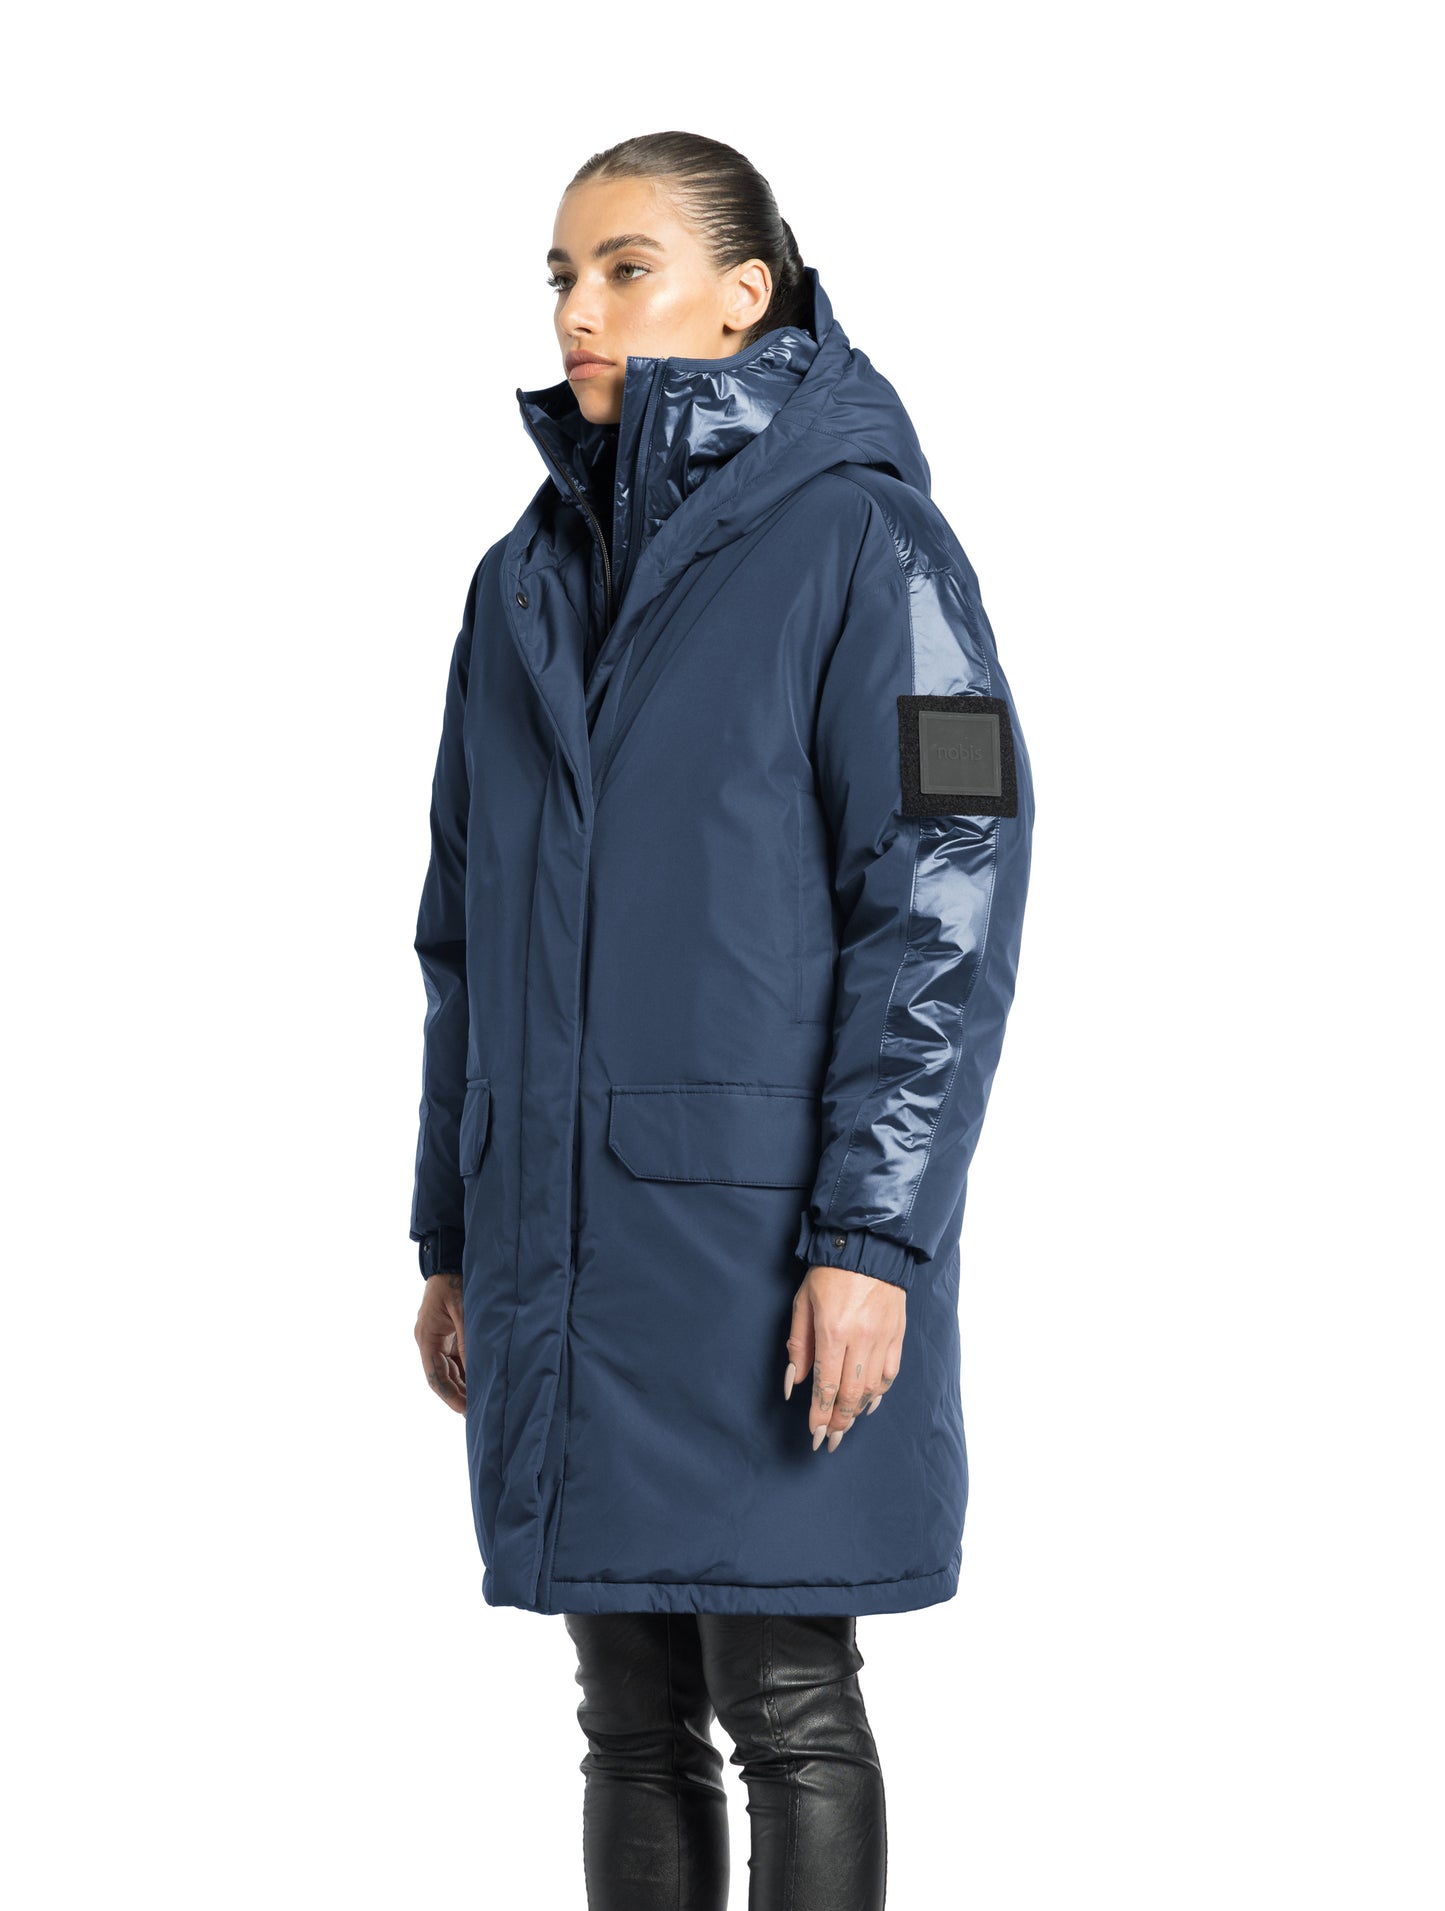 Slyn Women's Performance Parka in thigh length, premium 3-ply micro denier and cire technical nylon taffeta fabrication, Premium Canadian origin White Duck Down insulation, non-removable down-filled hood, inner hooded gilet, two-way centre-front zipper with magnetic closure wind flap, fleece-lined pockets at chest and waist, pit zipper vents, in Marine